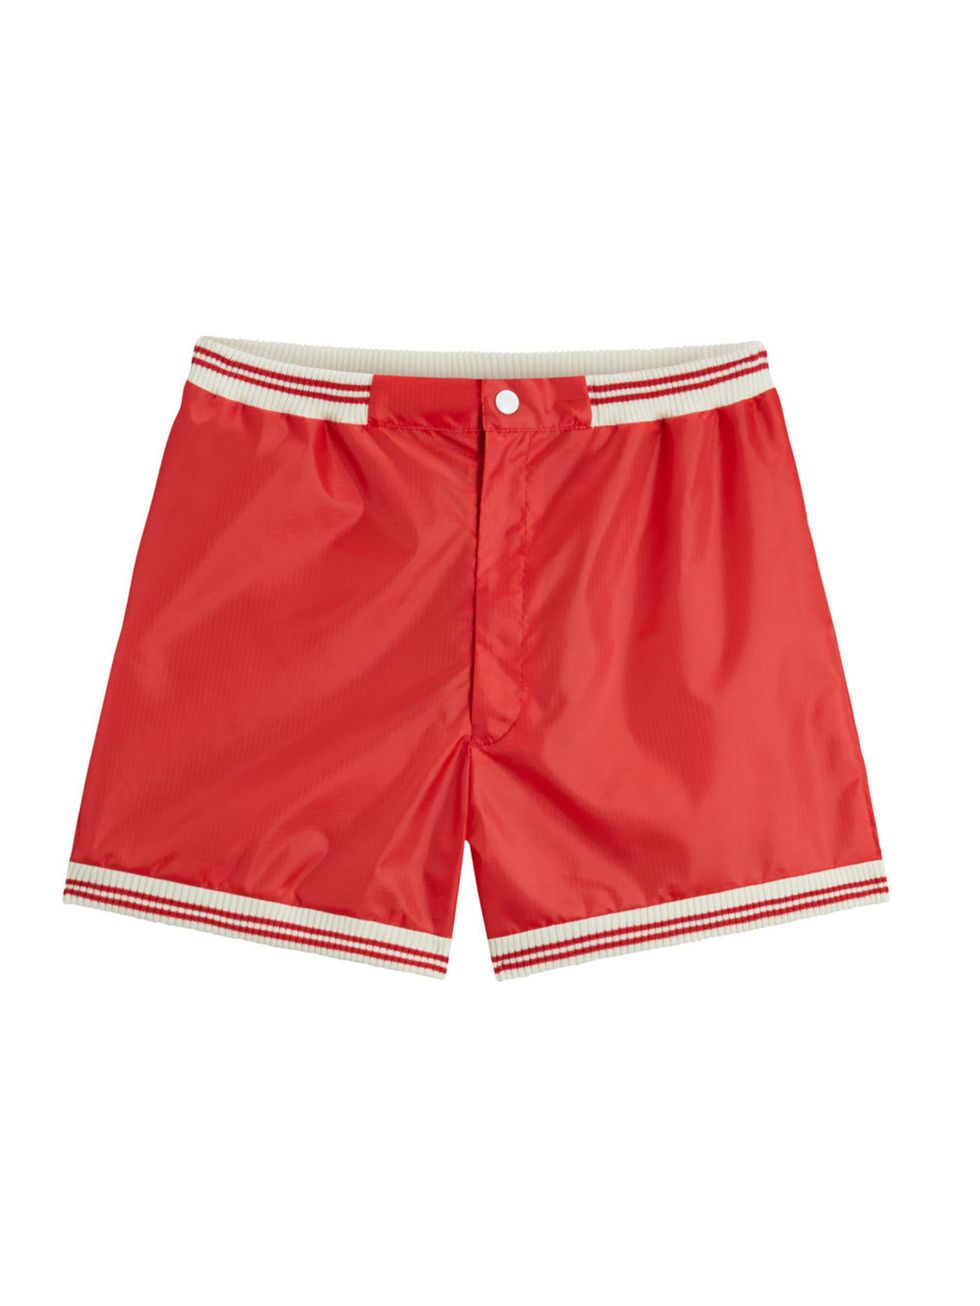 Textile, White, Red, Maroon, Active shorts, Pocket, Trunks, Symmetry, Coquelicot, 